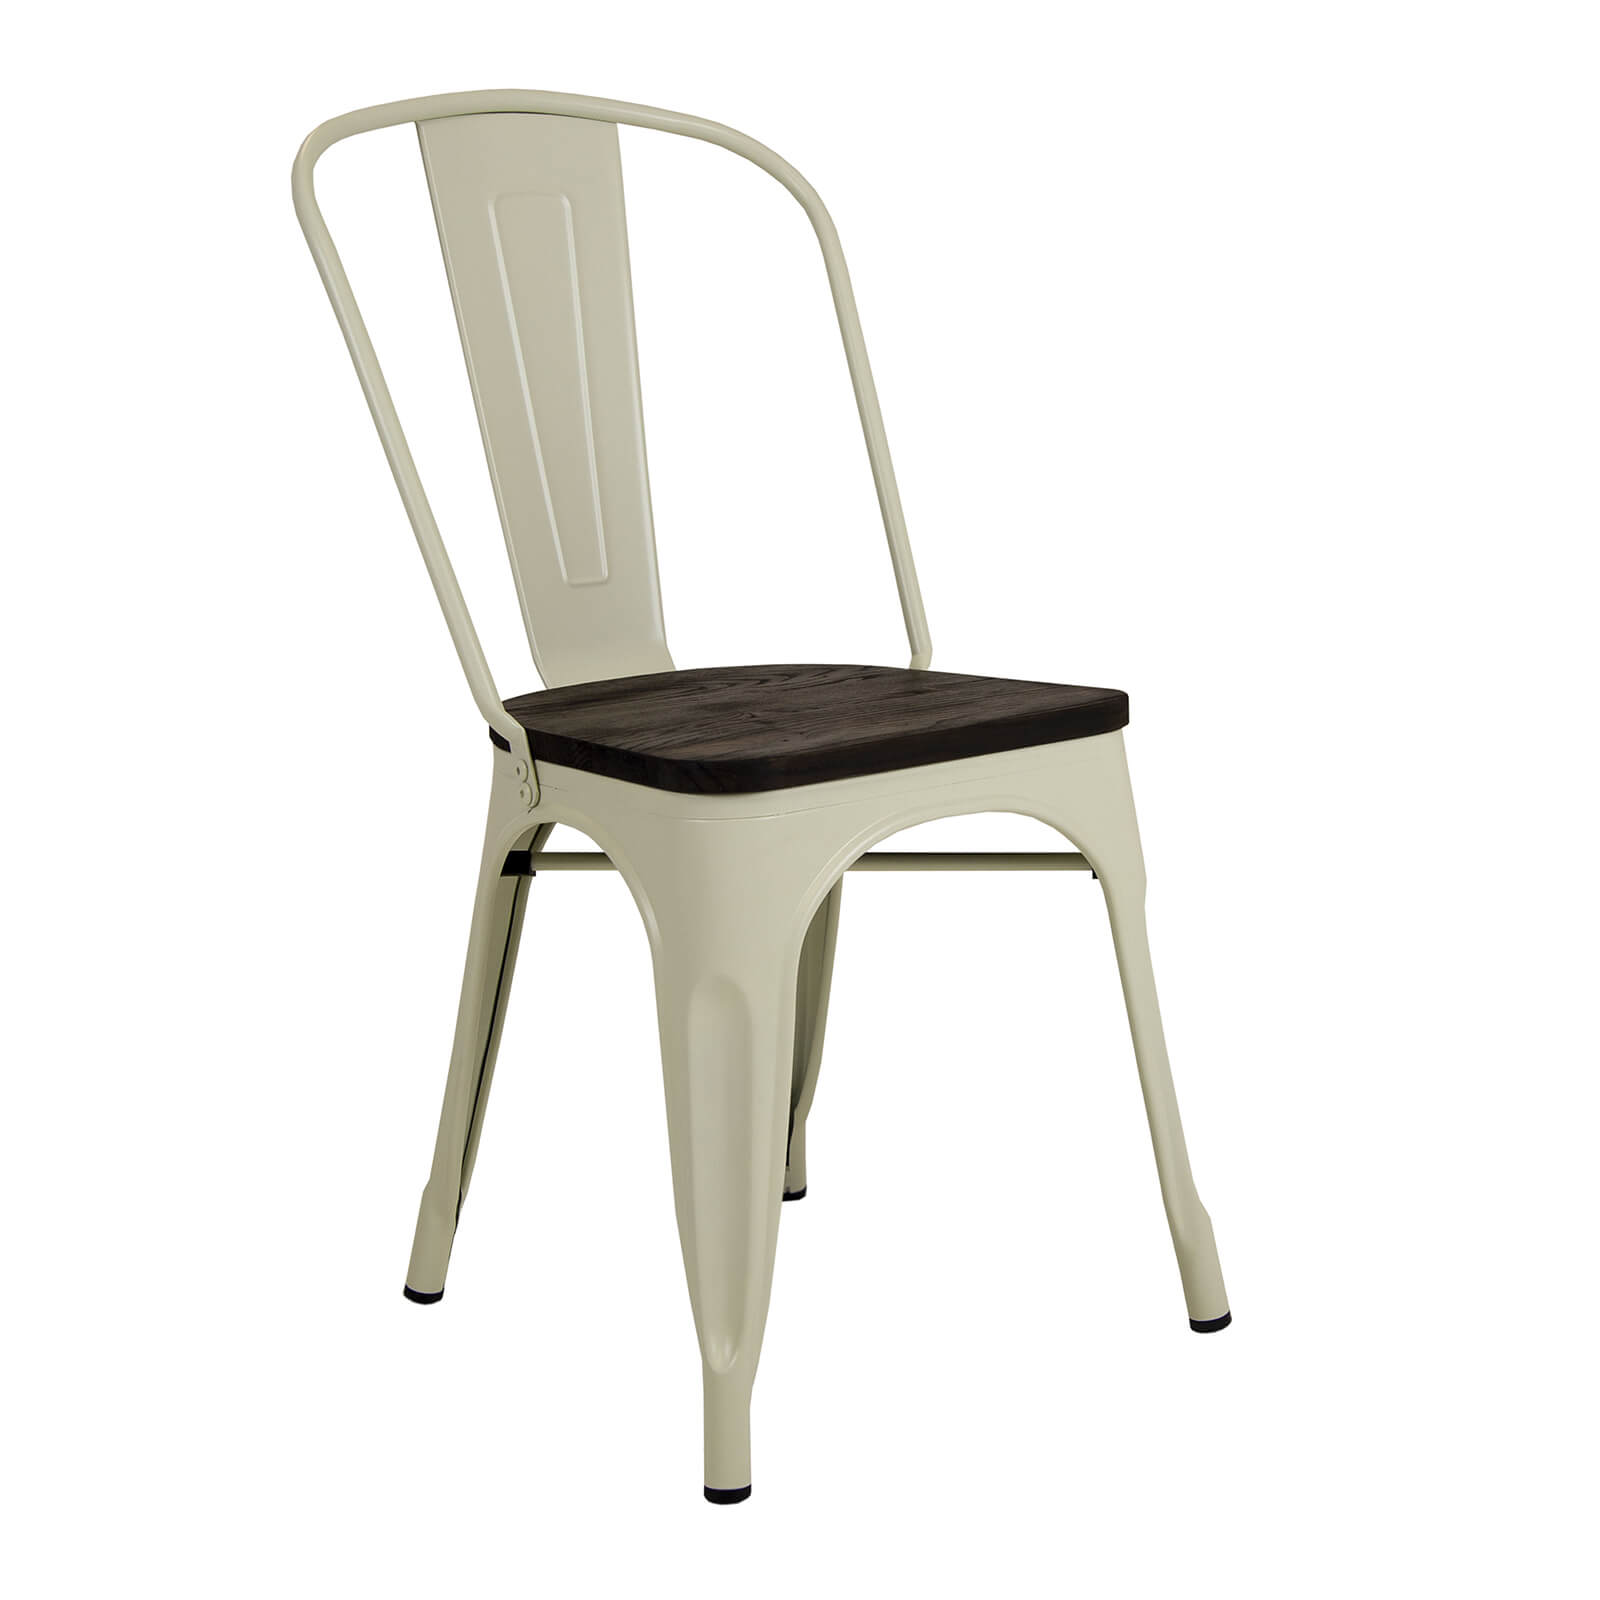 Pair of Metal & Wood Dining Chairs - Cream